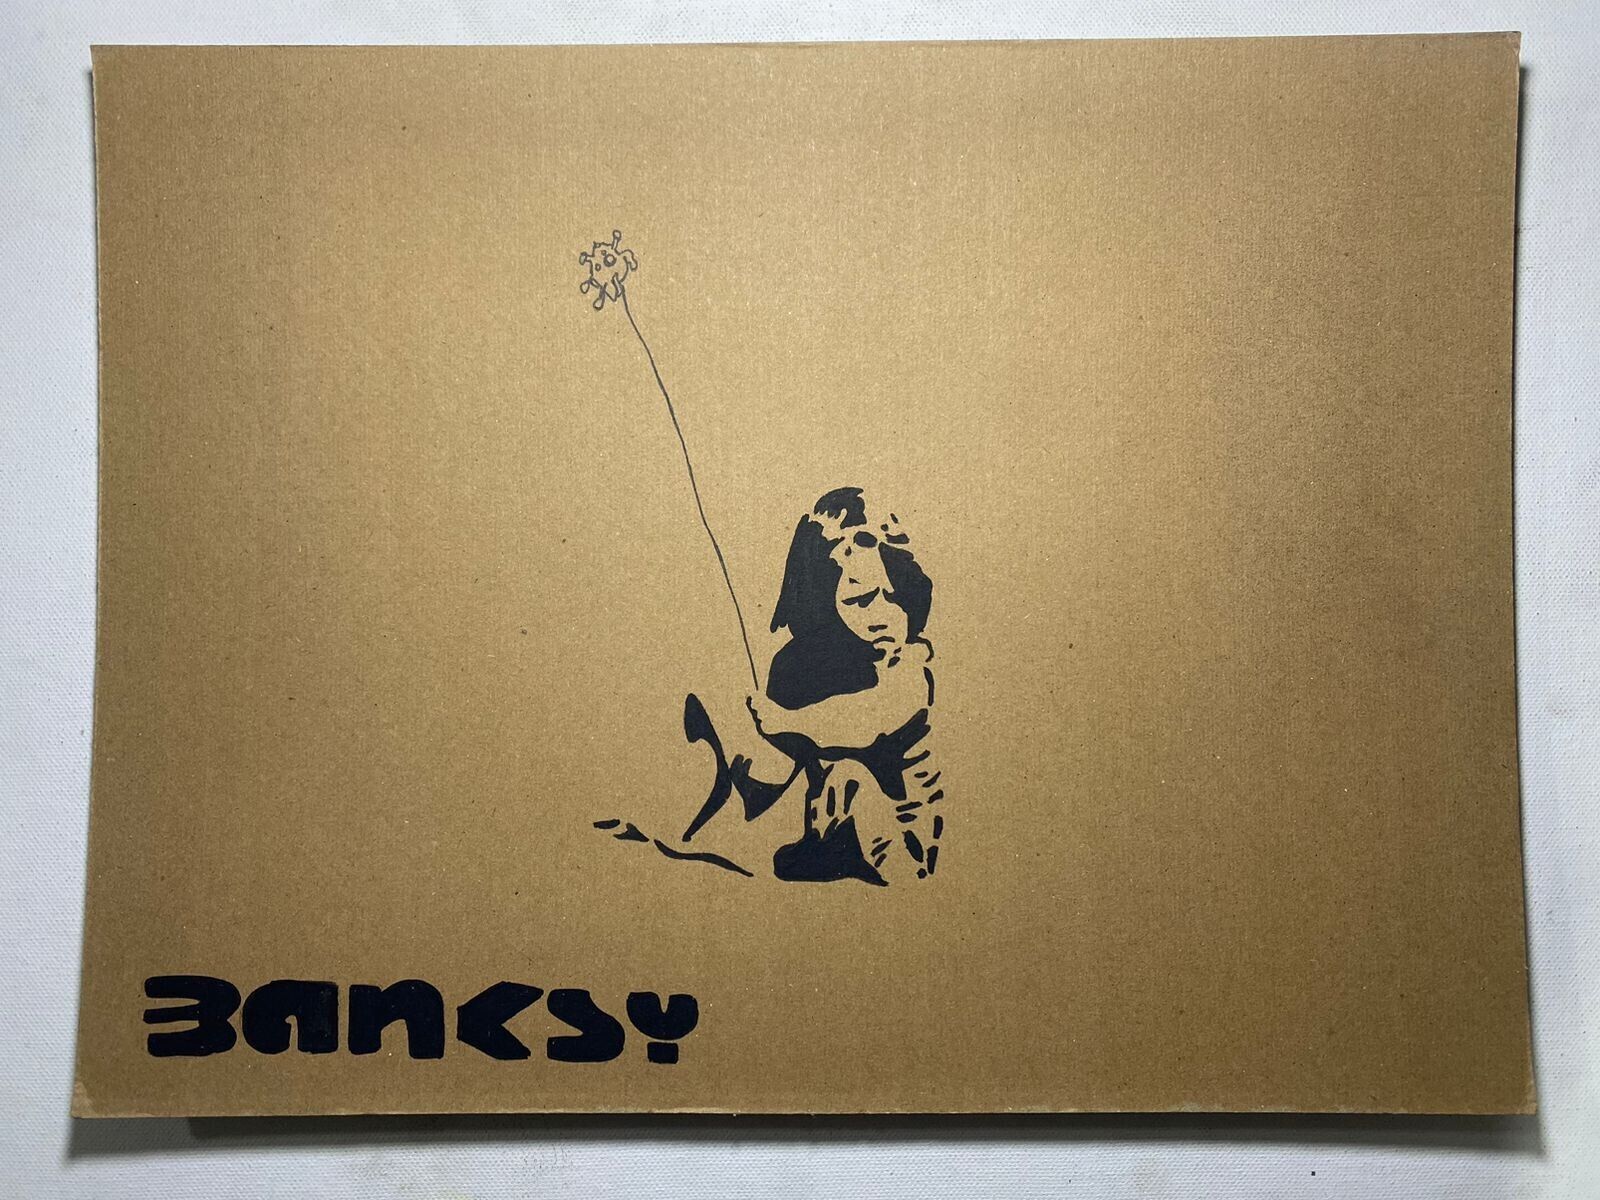 banksy painting on paperboard (Handmade) signed and stamped 15.7 x 11.8 in